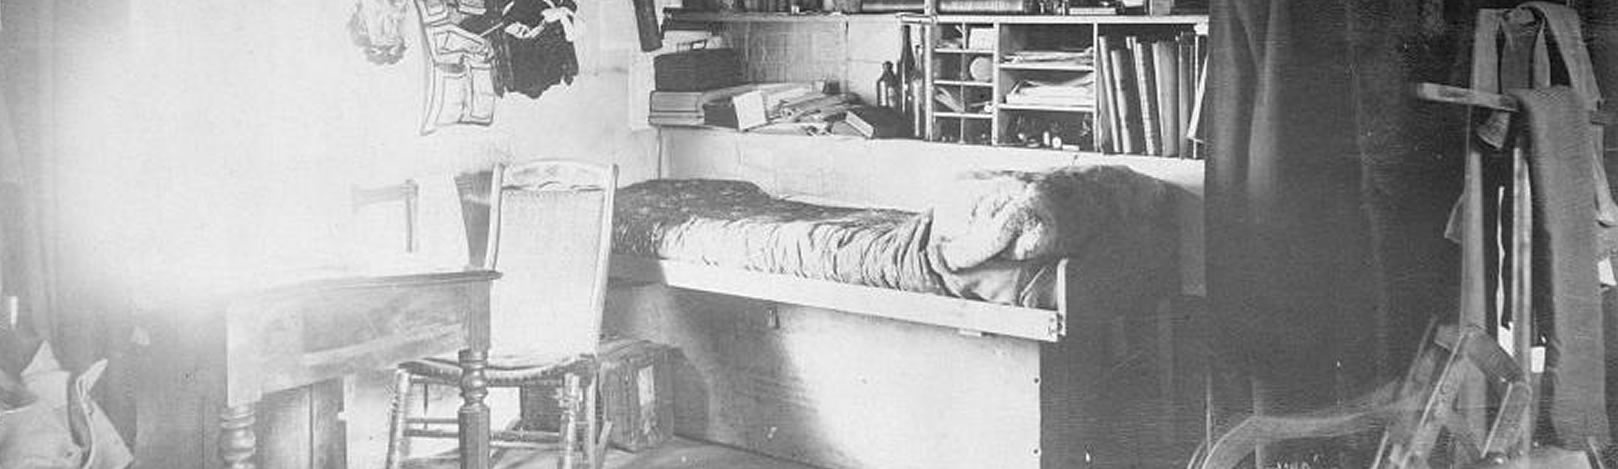 Historic photograph of Greely’s quarters, showing his bed, desk, and bookshelves. A window near the desk illuminates the room.